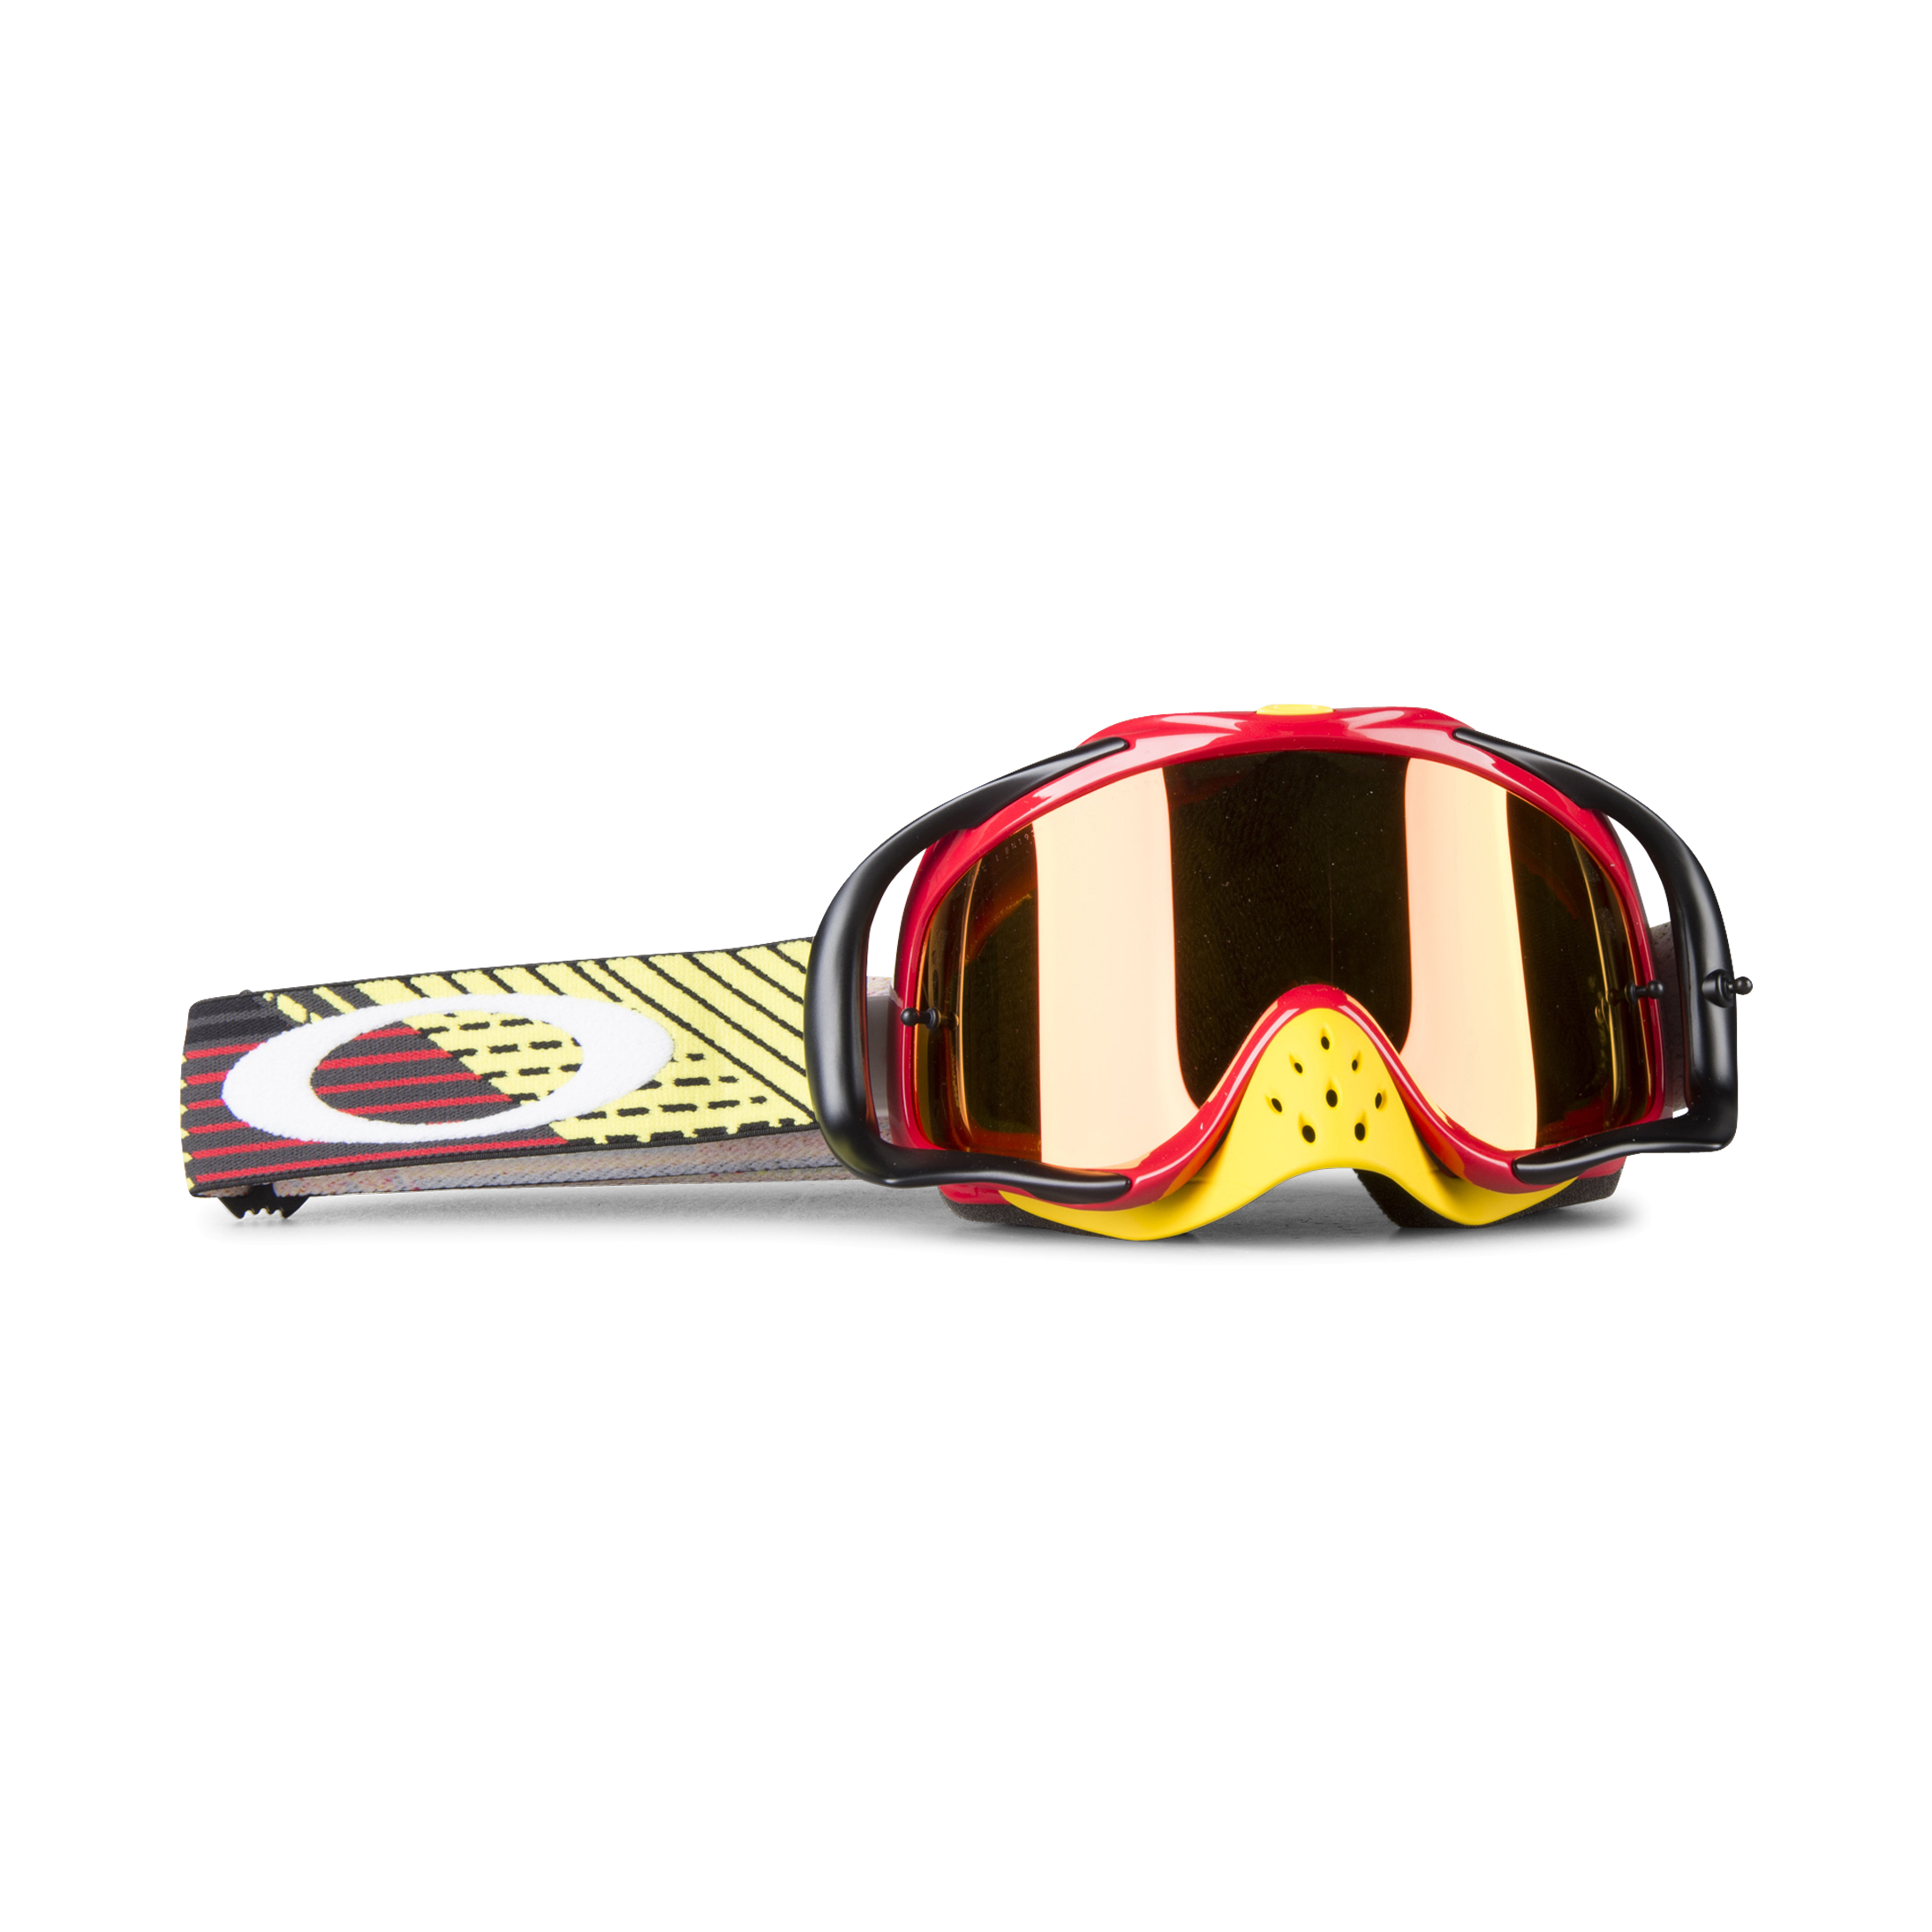 Oakley Crowbar Circuit MX Goggles Red-Yellow - Now 24% Savings | 24MX